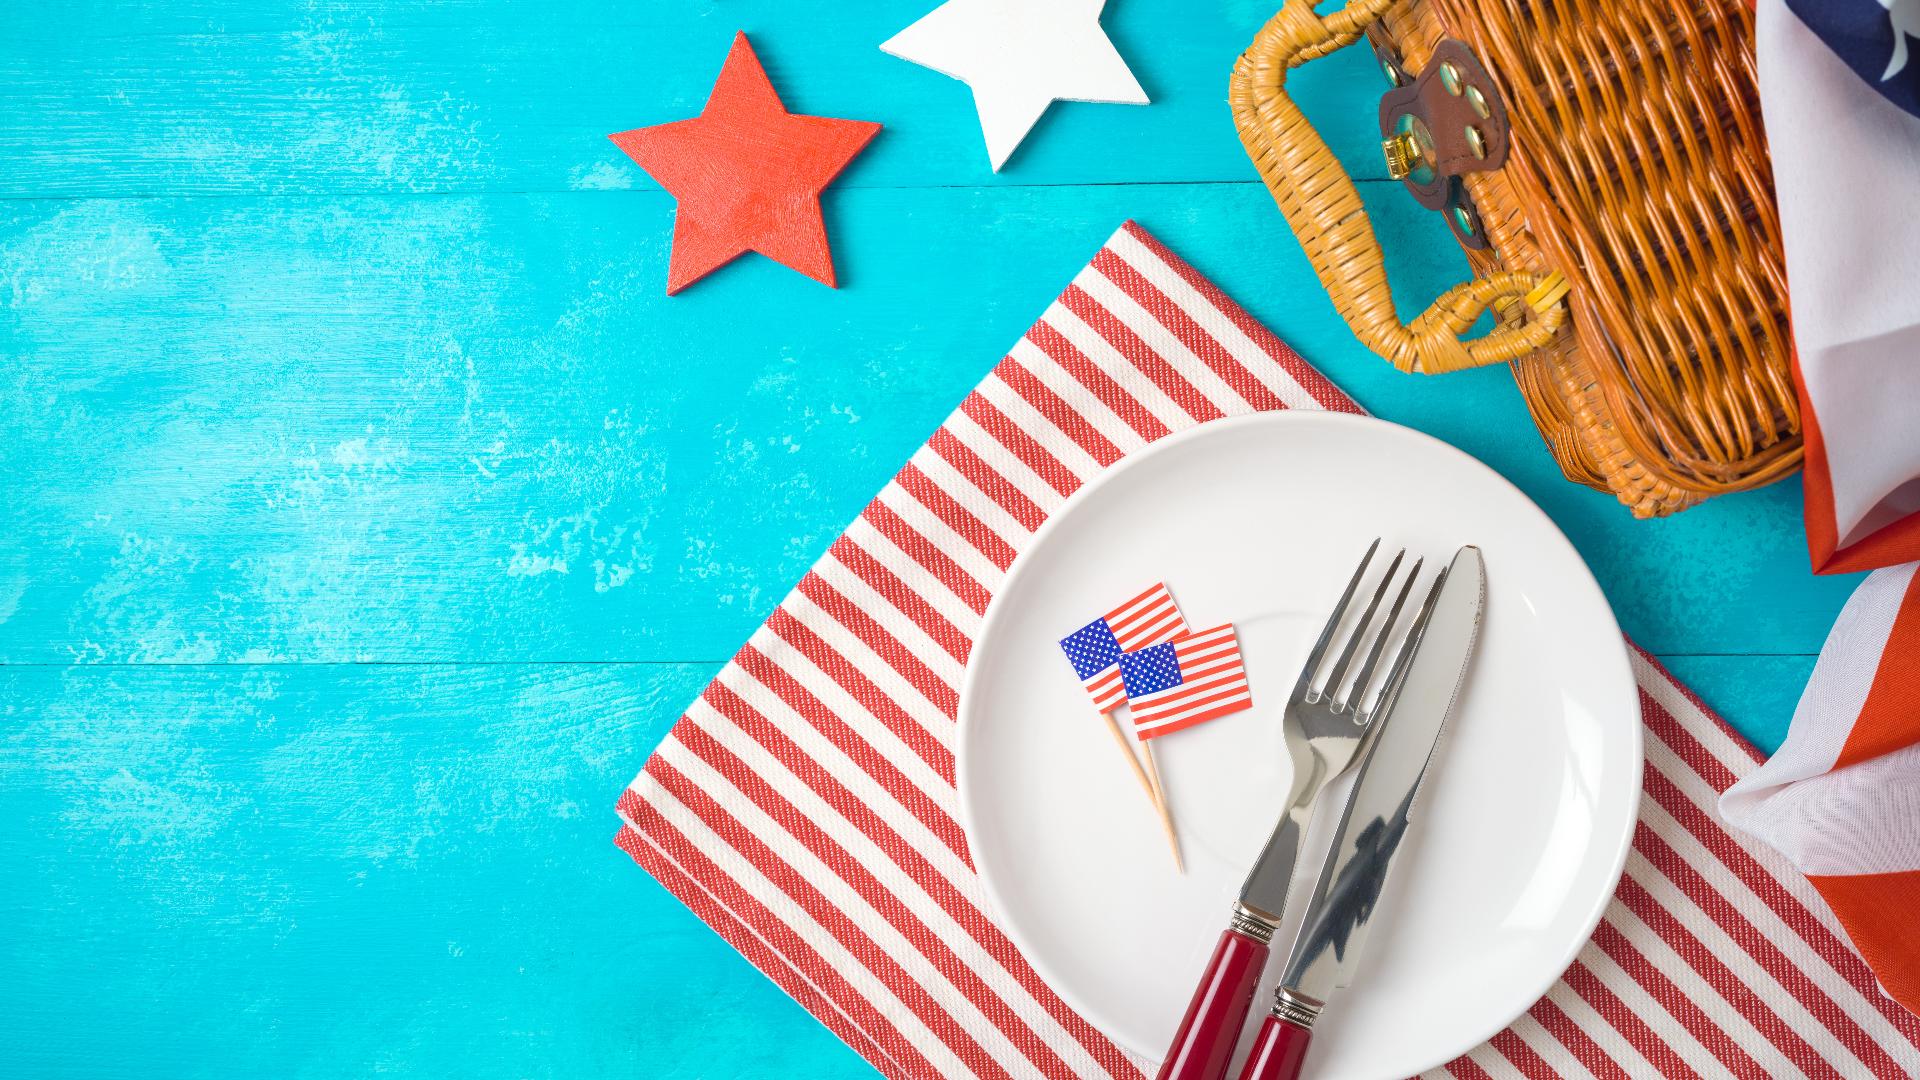 Sponsored by: Limor Media. Lifestyle Contributor Limor Suss shares what you need if you're entertaining this 4th of July! For more go to limor.tv.